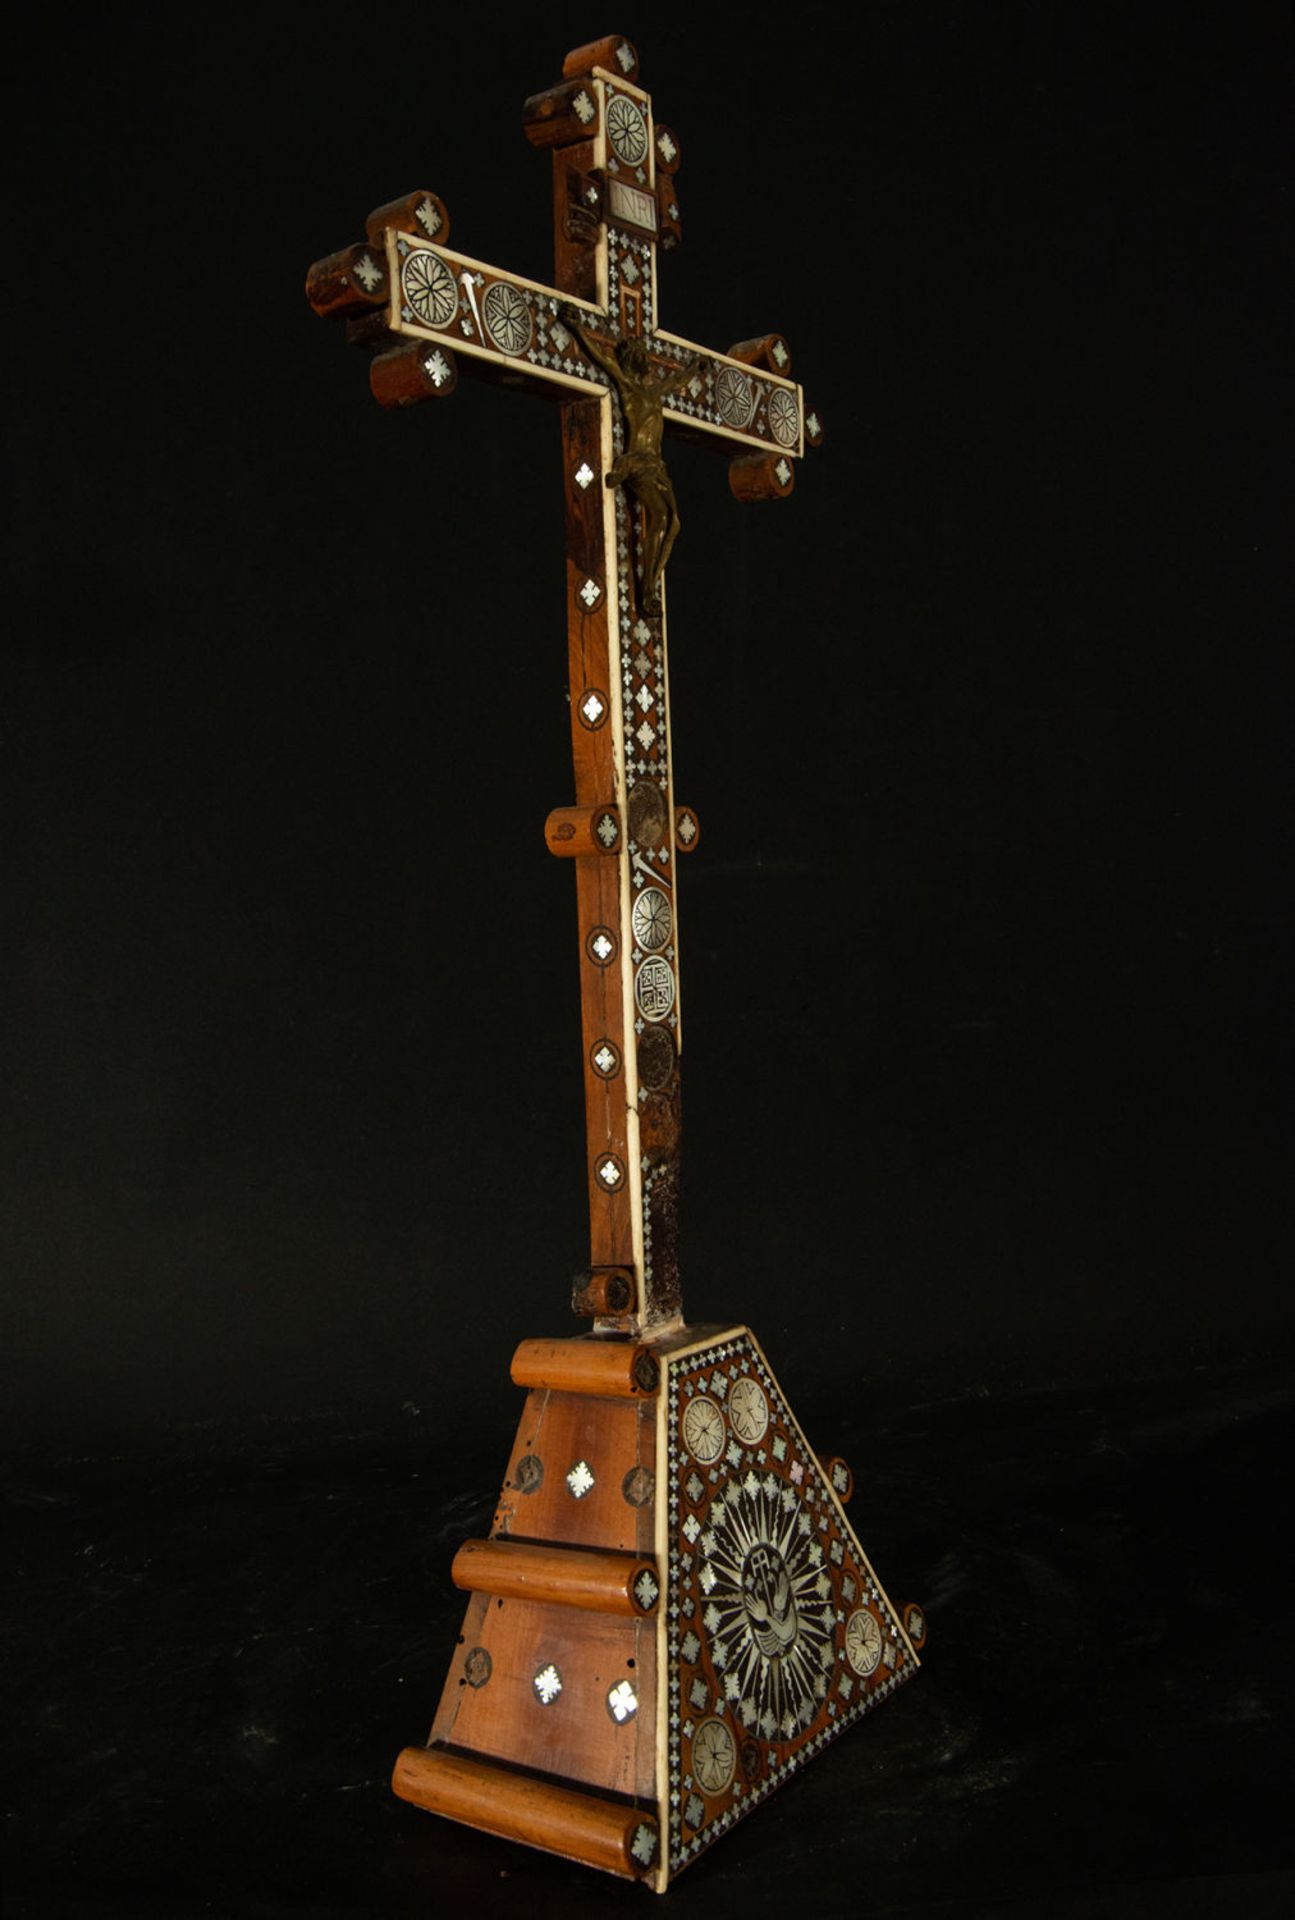 Jerusalem Cross in Rosewood and Mother of Pearl Inlays, 19th Century - Image 4 of 6